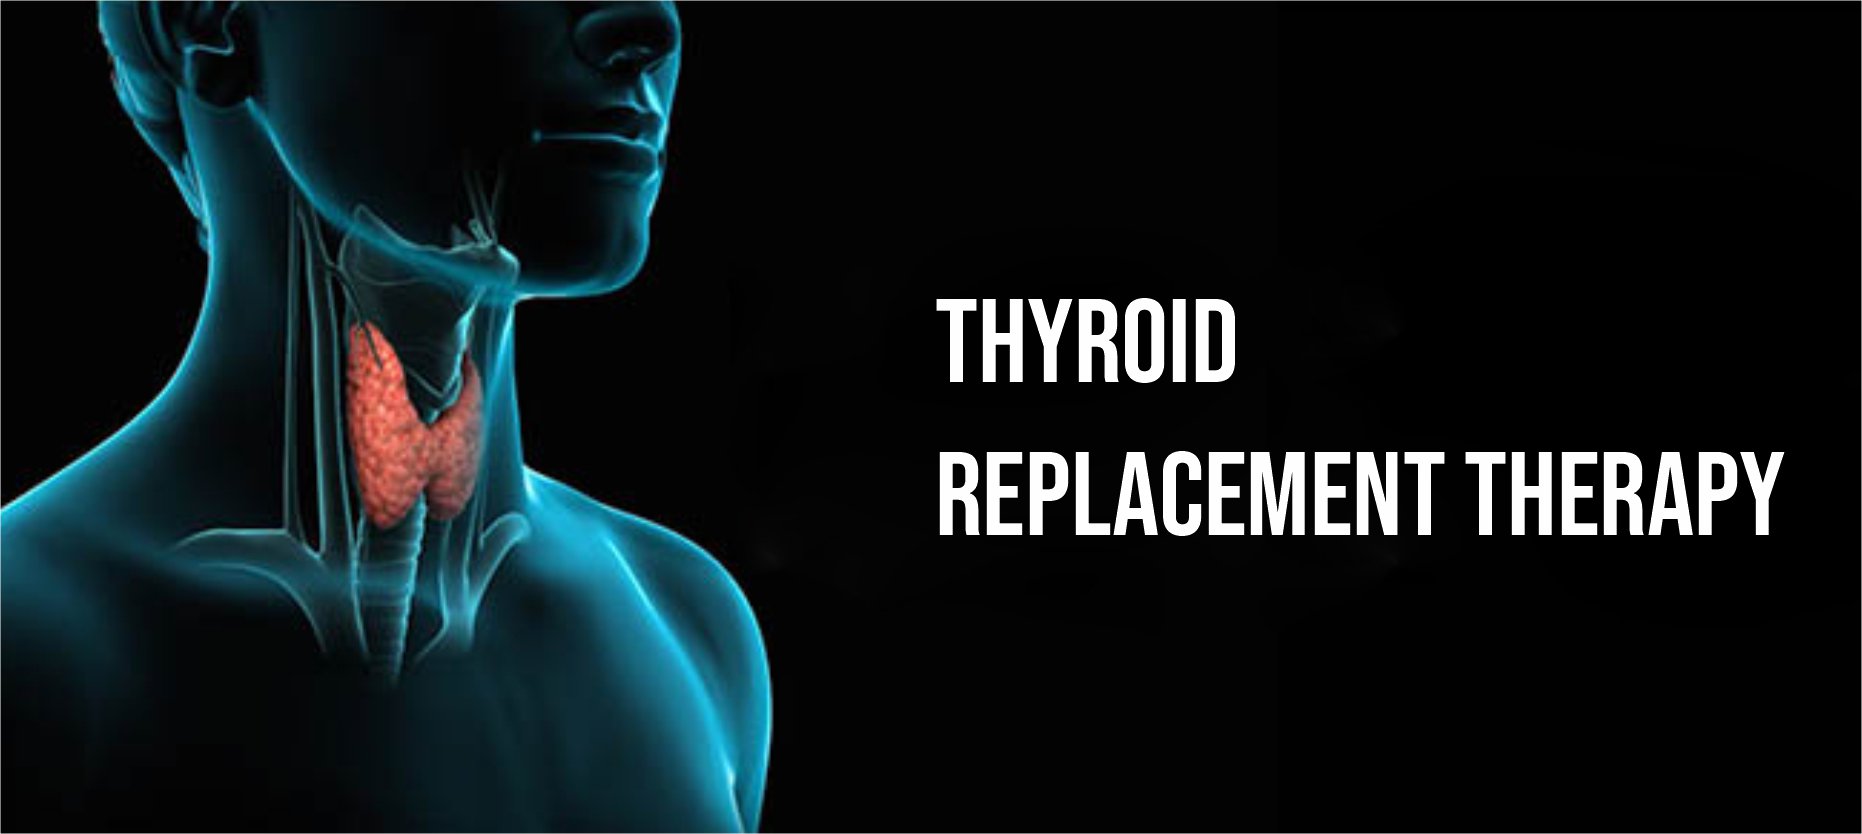 Thyroid replacement